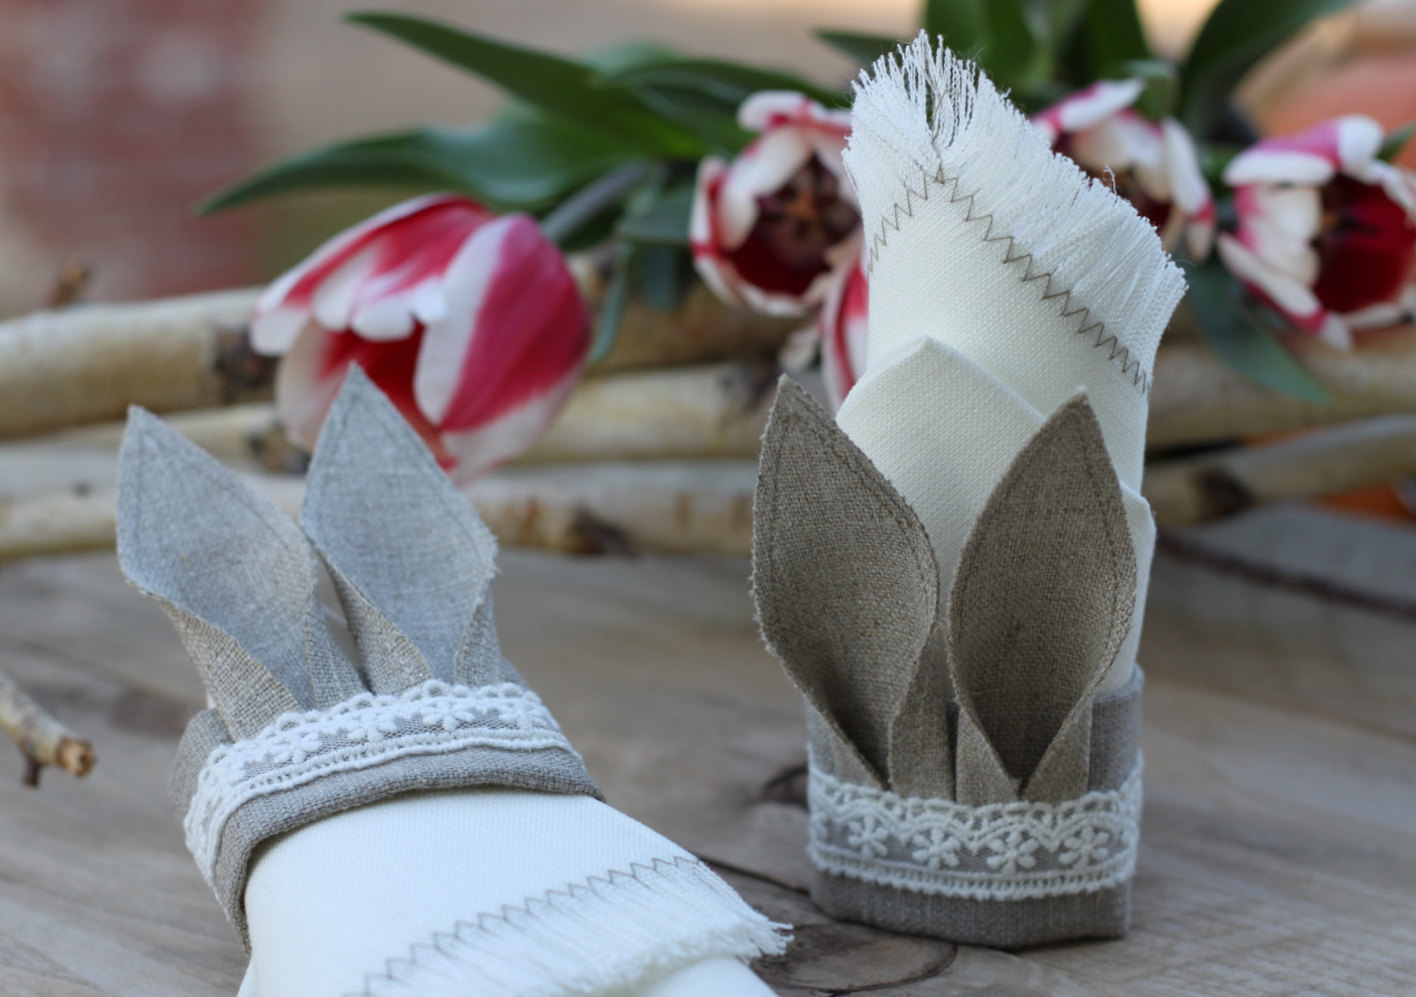 Marina, and to hold Easter napkins - here are Bunny ears napkin ring